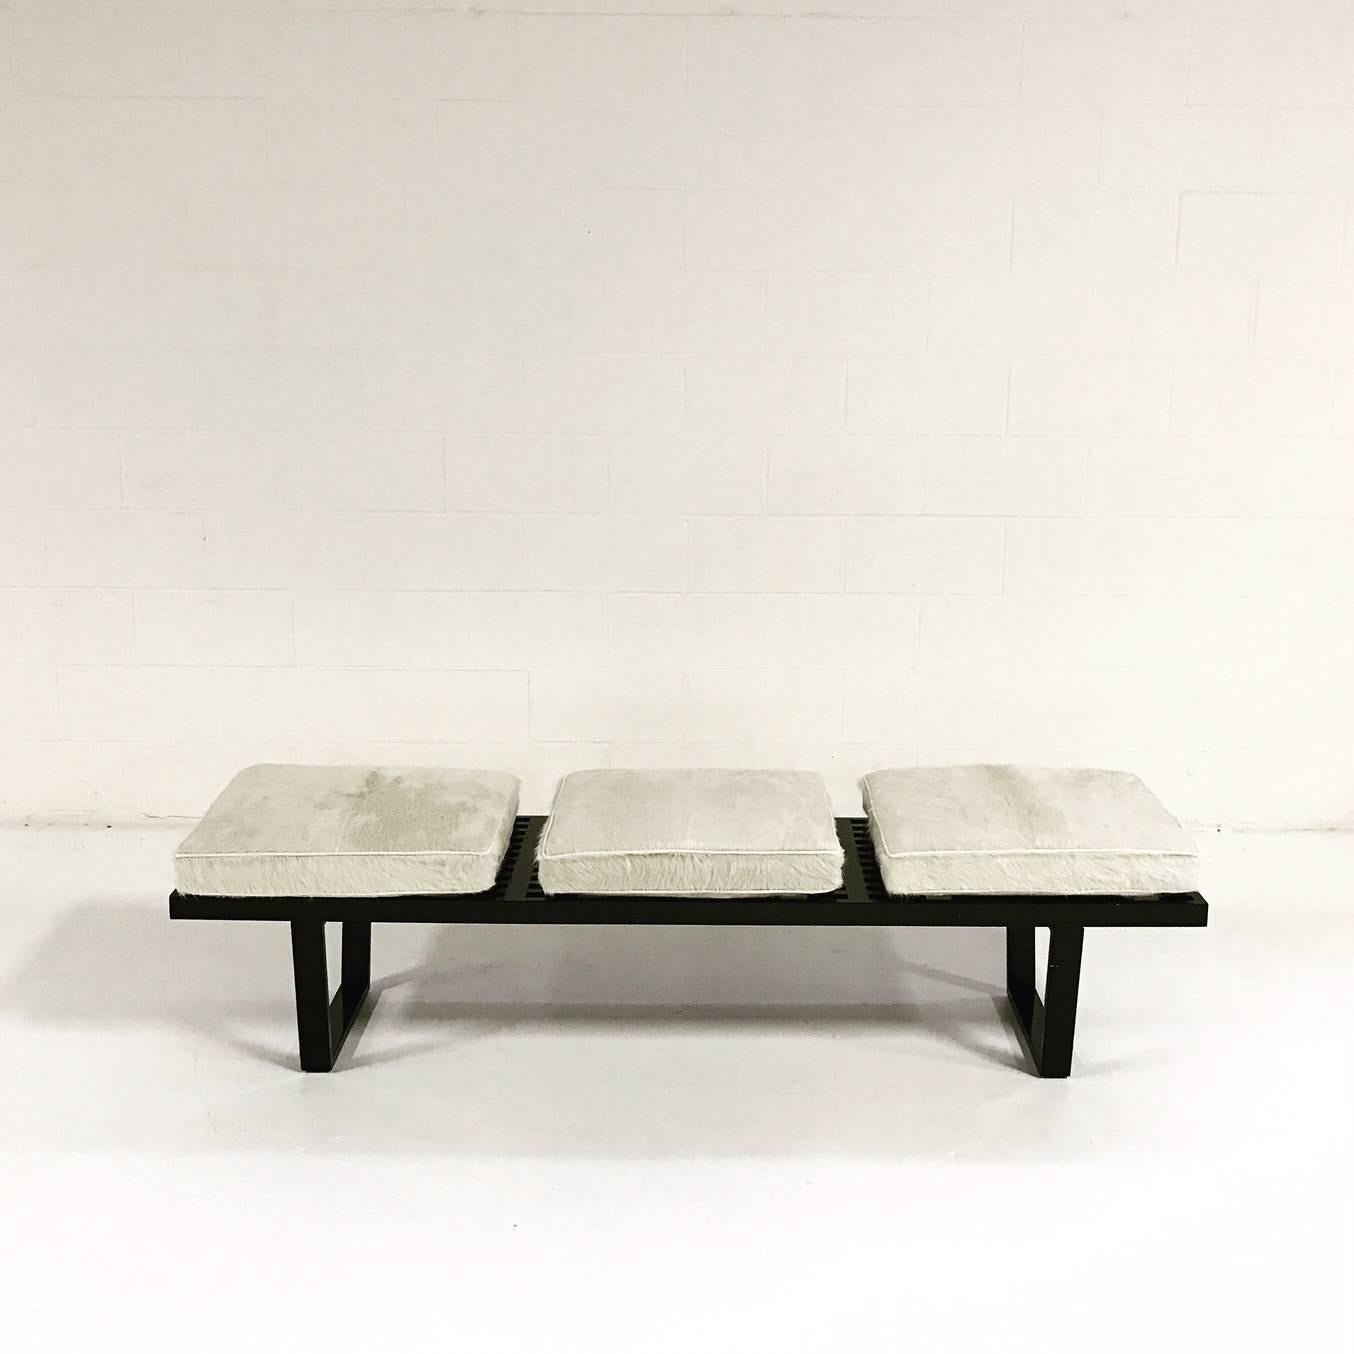 A modern bench with beautiful lines! 

The model 4692 platform bench is a landmark of modern design. The rectilinear lines of the surface reflect designer George Nelson's architectural background. Nelson's creative goal when designing the platform